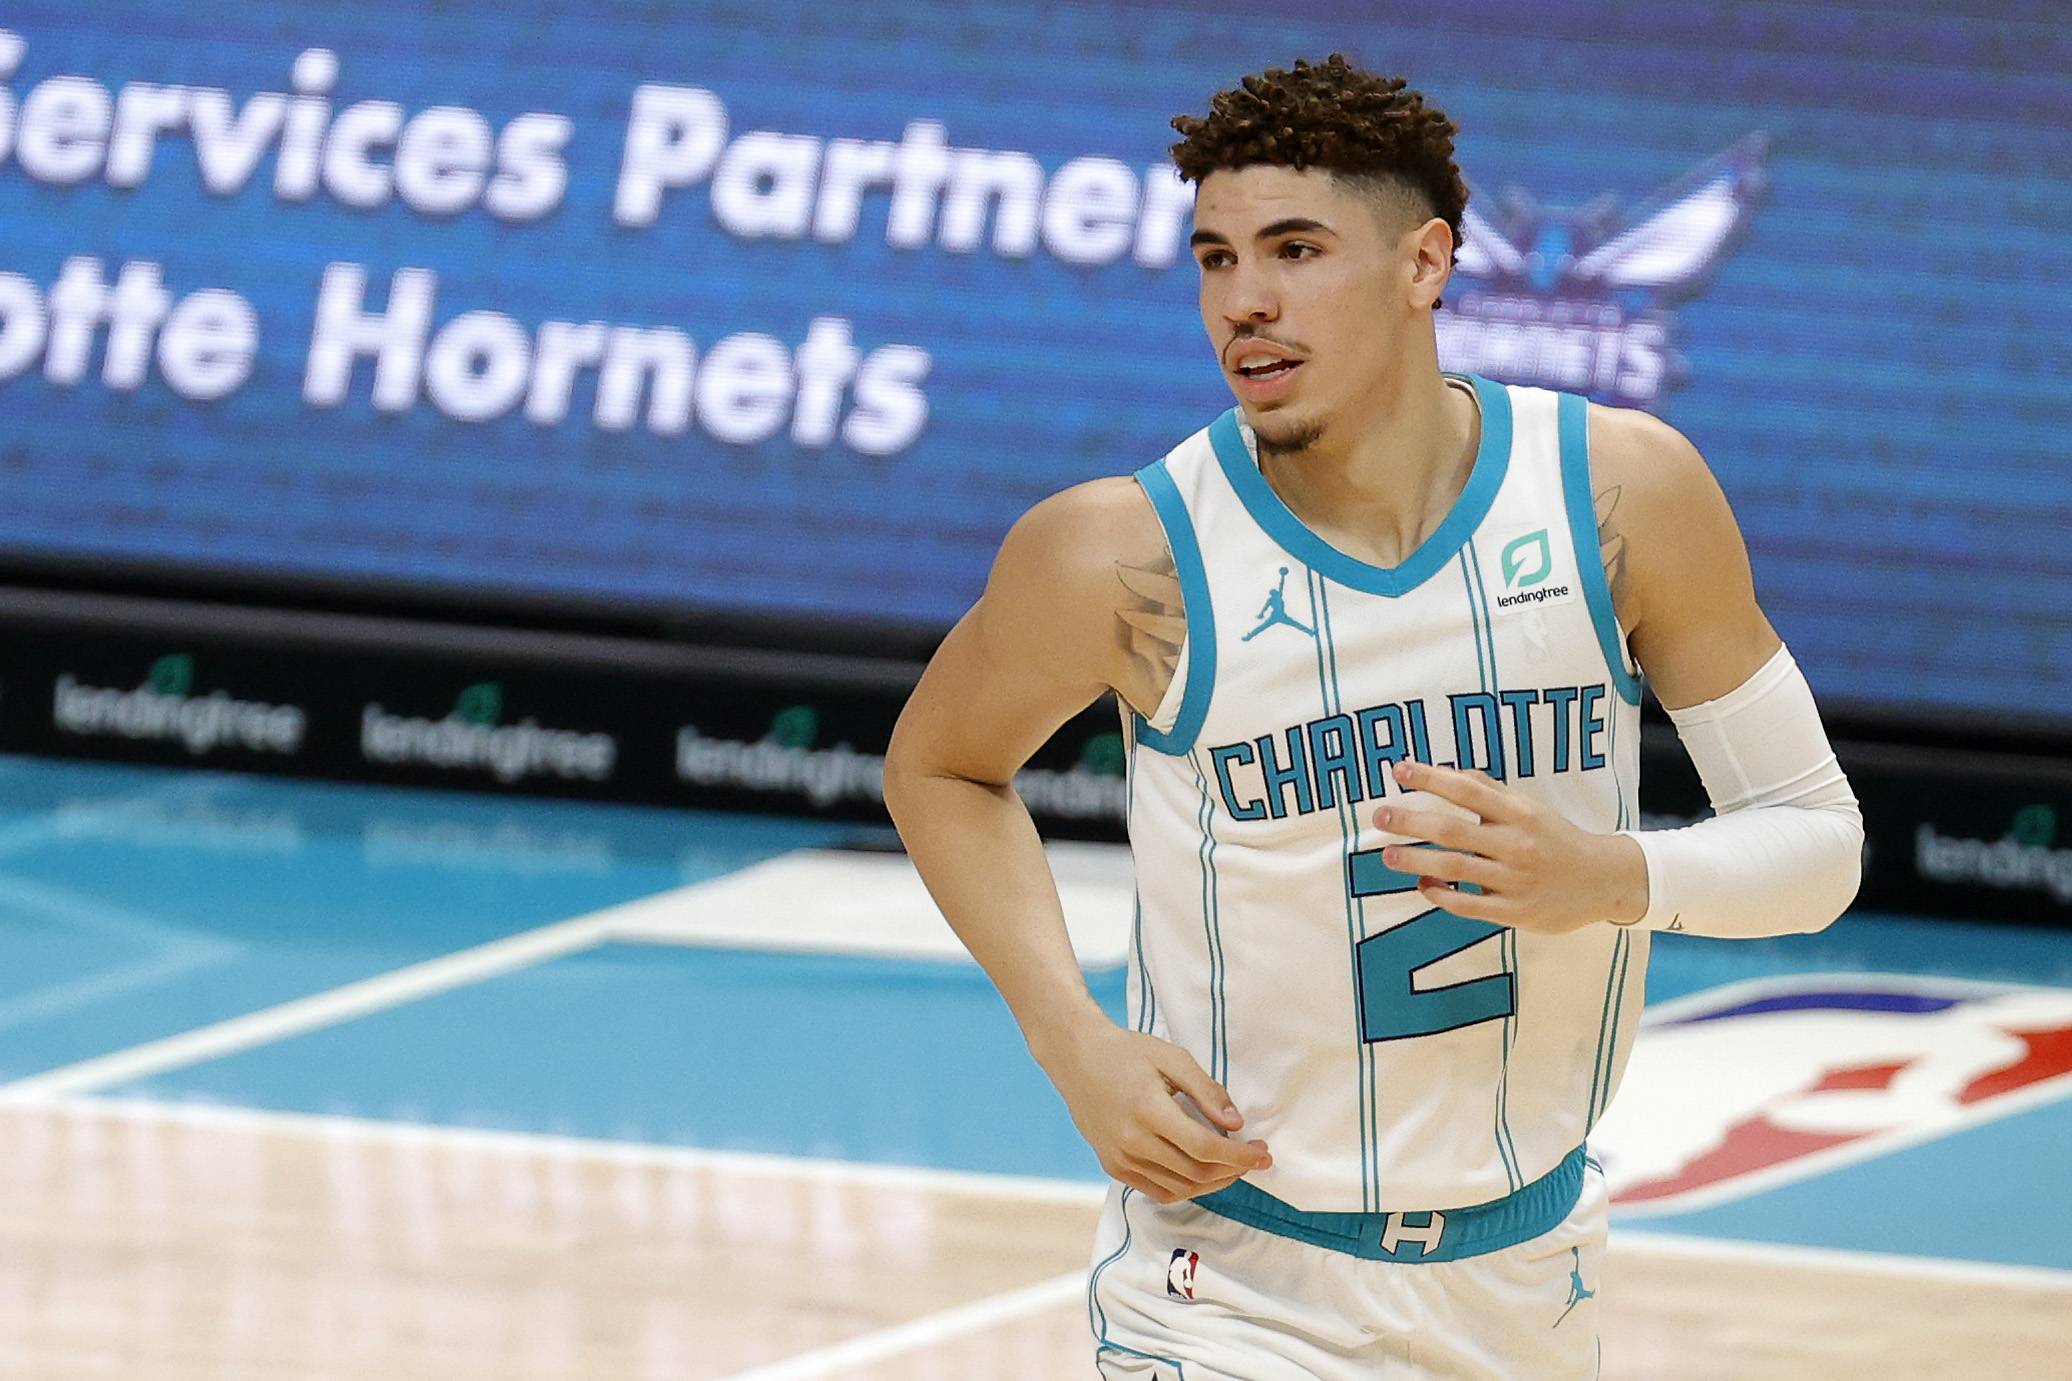 CHARLOTTE, NORTH CAROLINA - DECEMBER 12: LaMelo Ball #2 of the Charlotte Hornets looks on during the first half of their game at Spectrum Center on December 12, 2020 in Charlotte, North Carolina. (Photo by Jared C. Tilton/Getty Images)